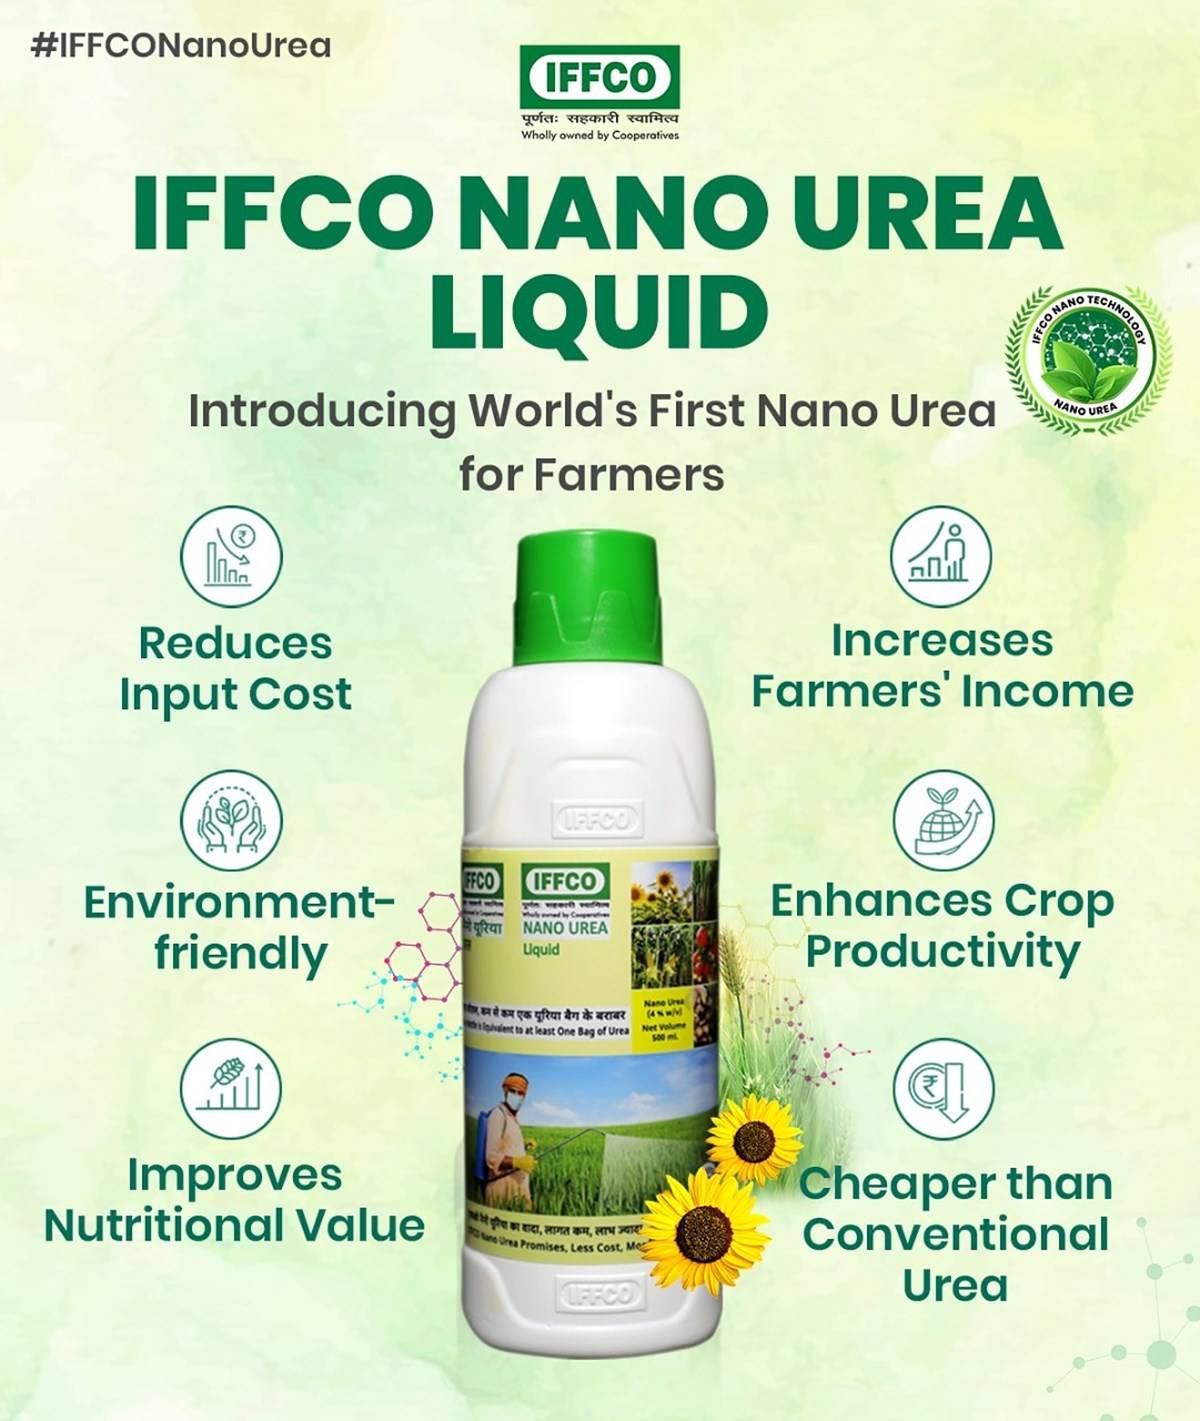 World's First 'Nano Urea' by IFFCO; Available in Liquid Form